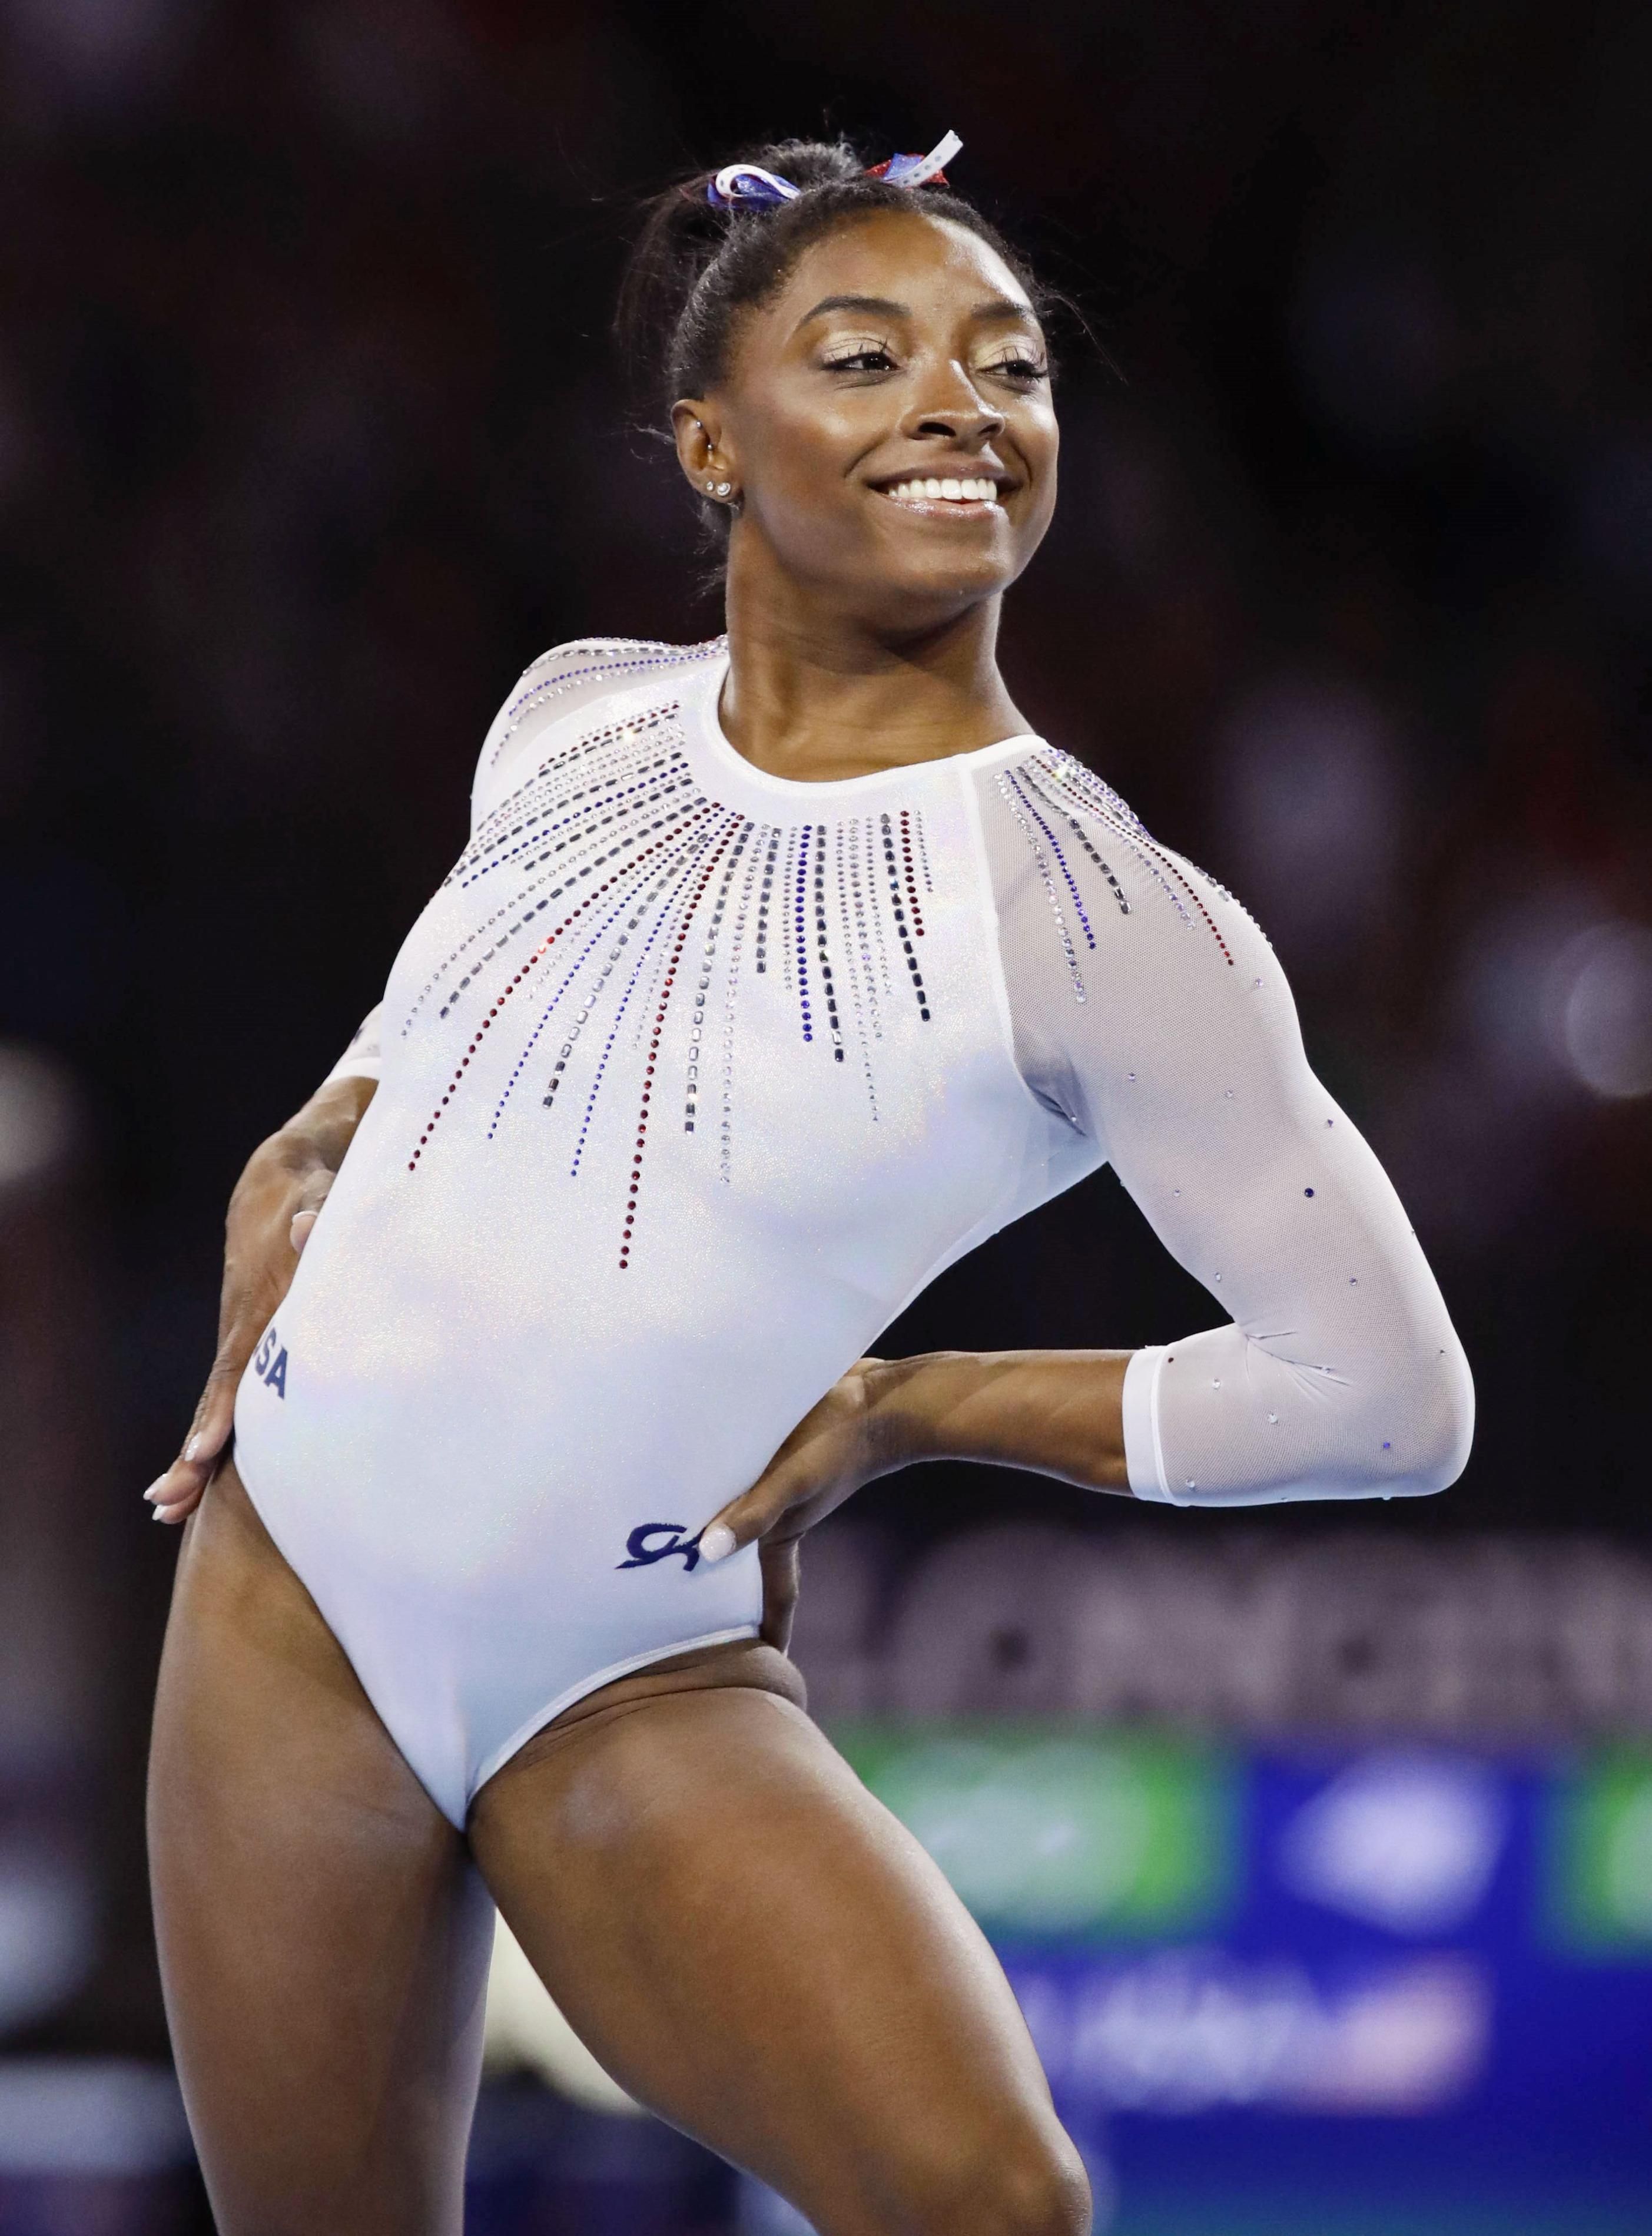 Simone Biles during the women's individual all-around final at the World Gymnastics Championships on October 10, 2019, in Stuttgart, Germany. | Source: Getty Images